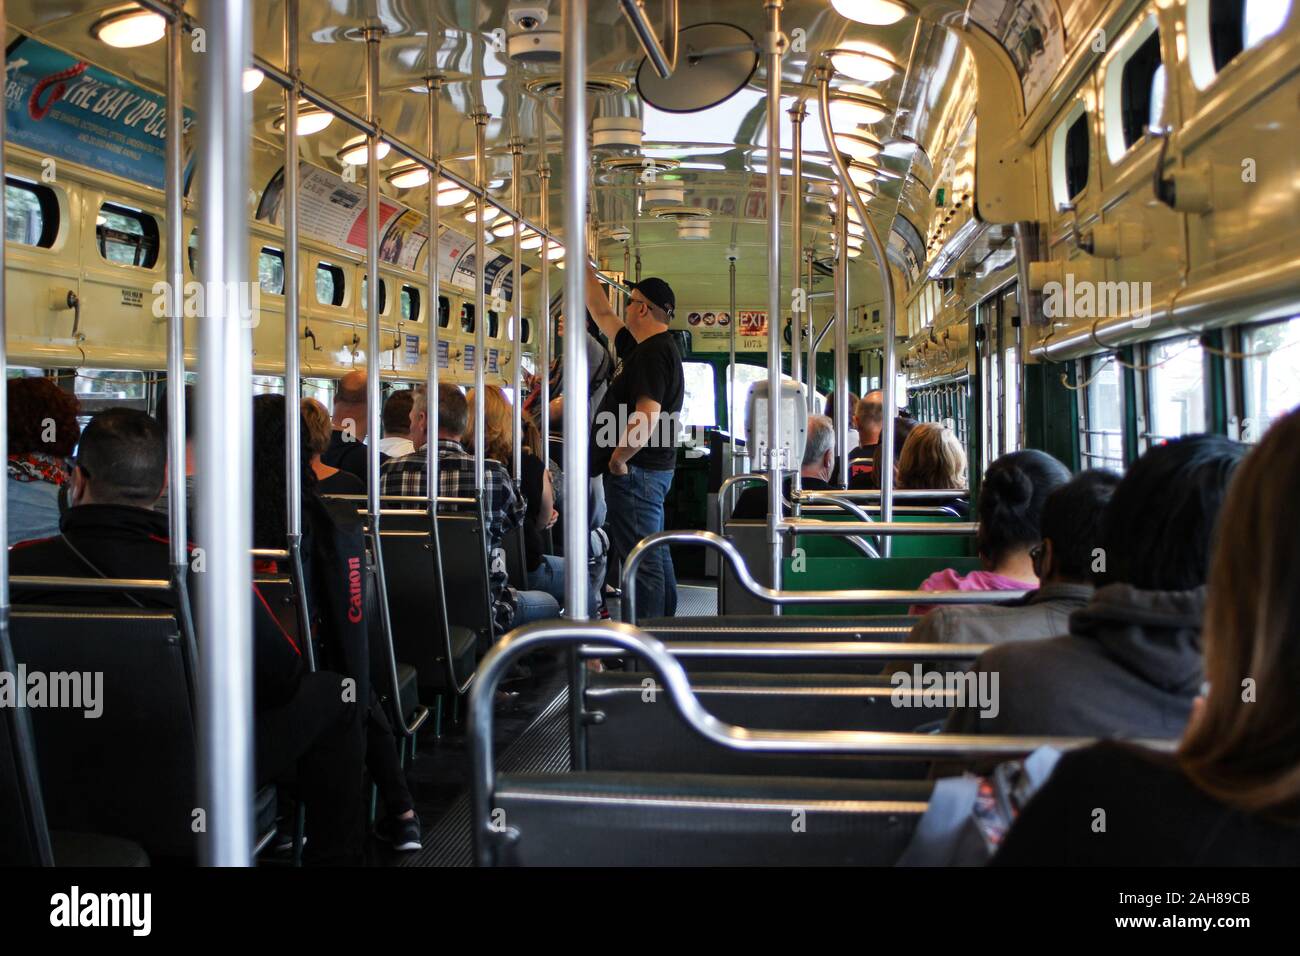 Interior of a vintage tram or a heritage streetcar in San Francisco, United States of America Stock Photo